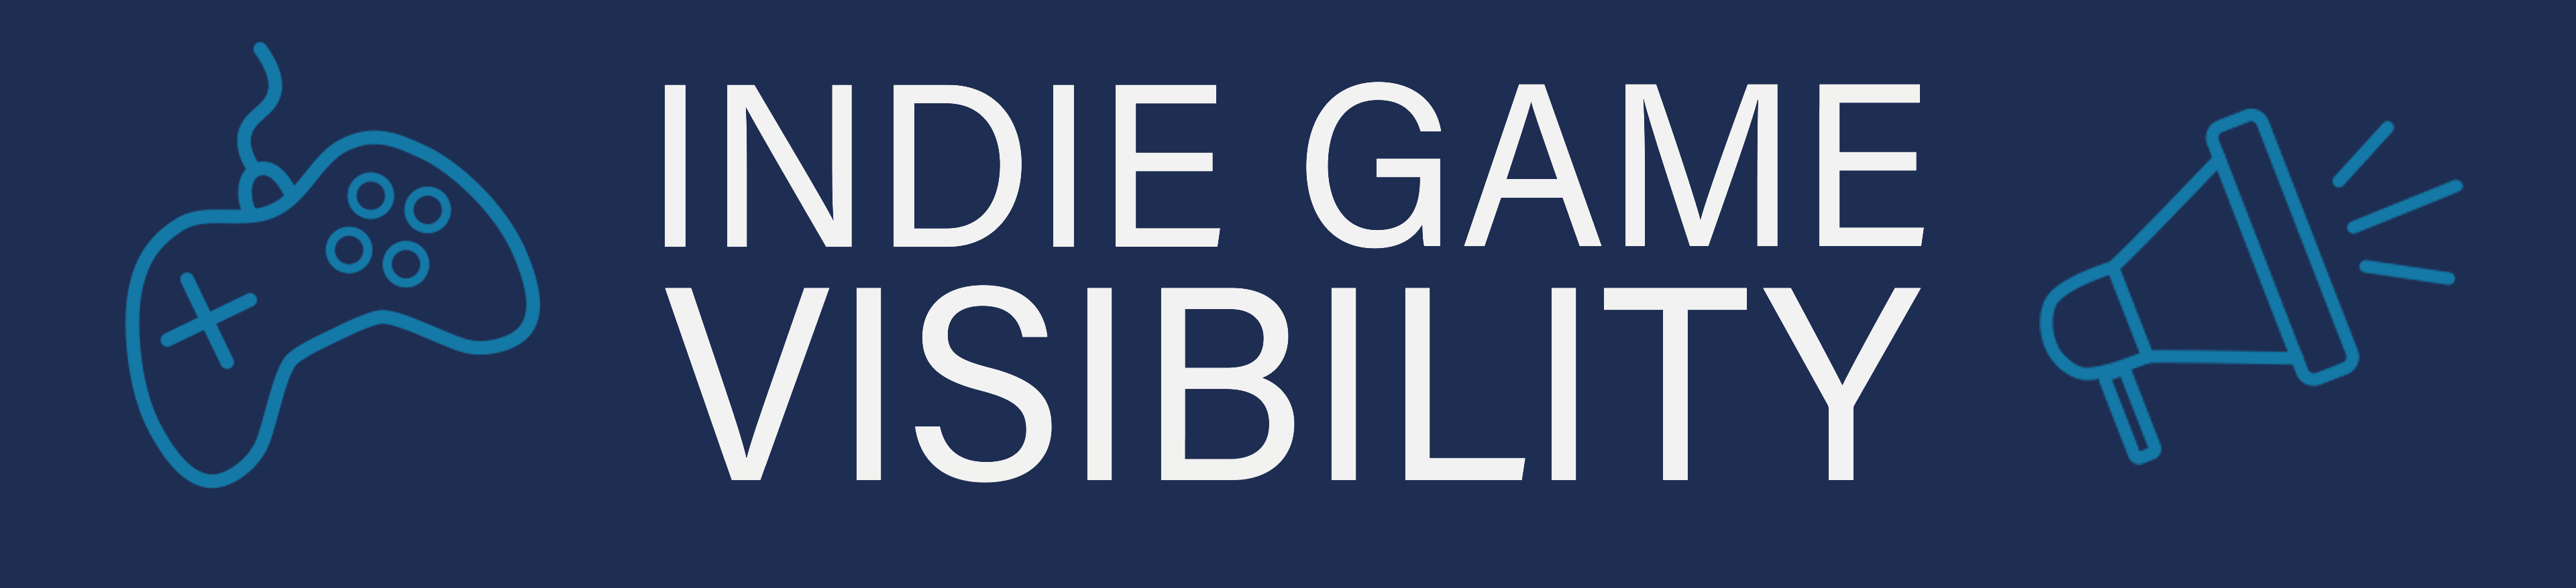 Indie Game Visibility